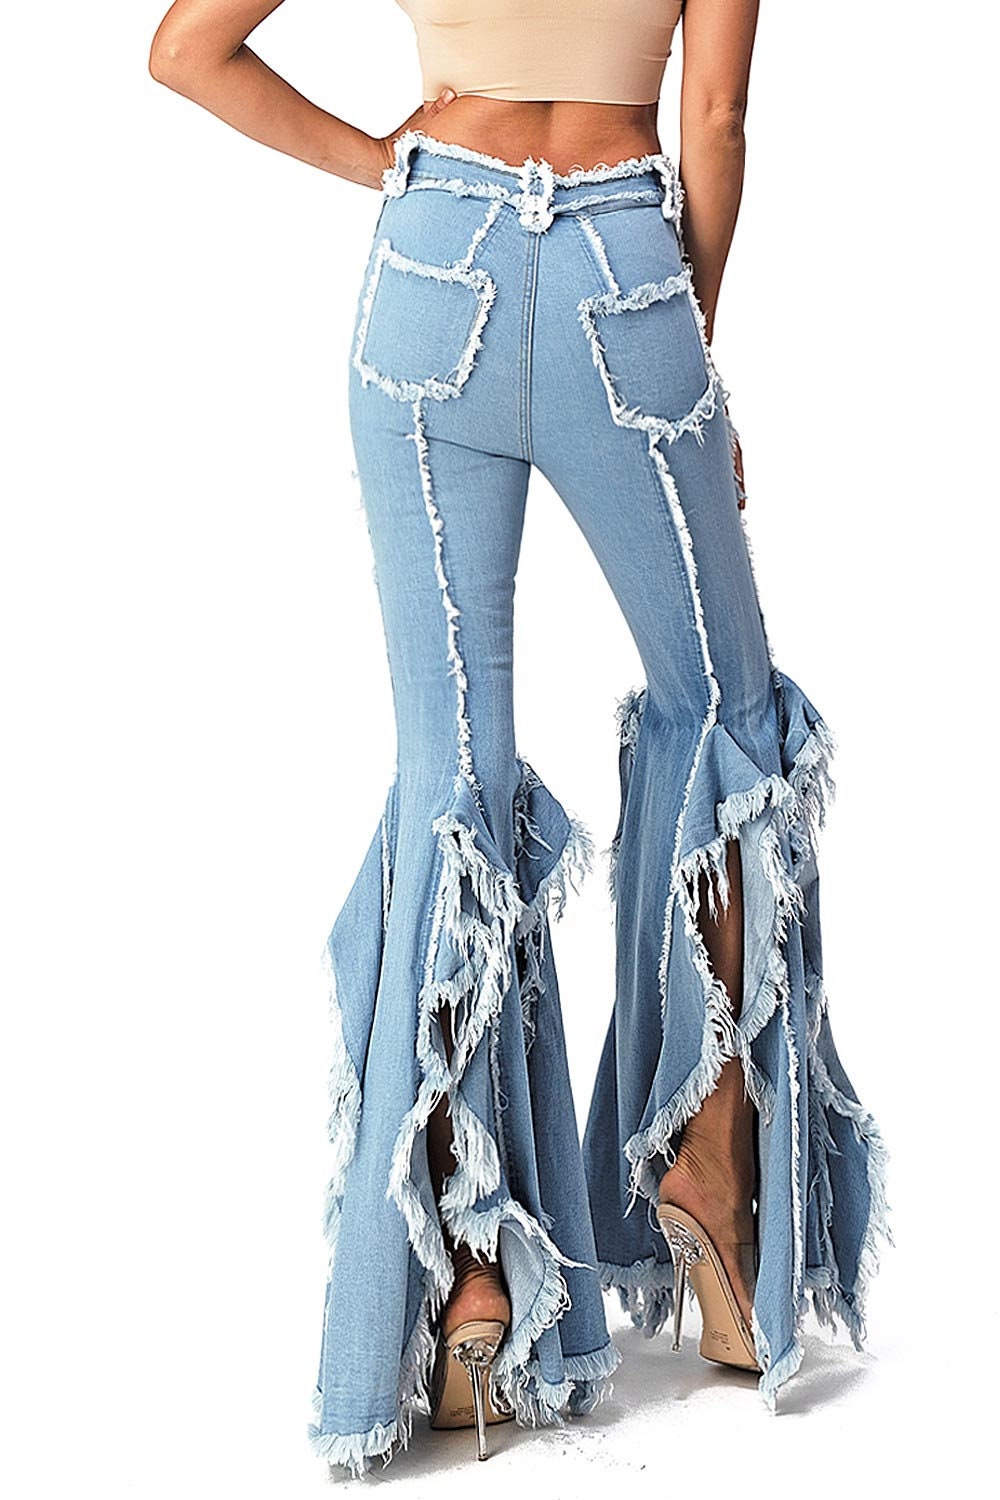 Unique Ruffle Ripped Denim High Jeans Carnival - Etsy Finland